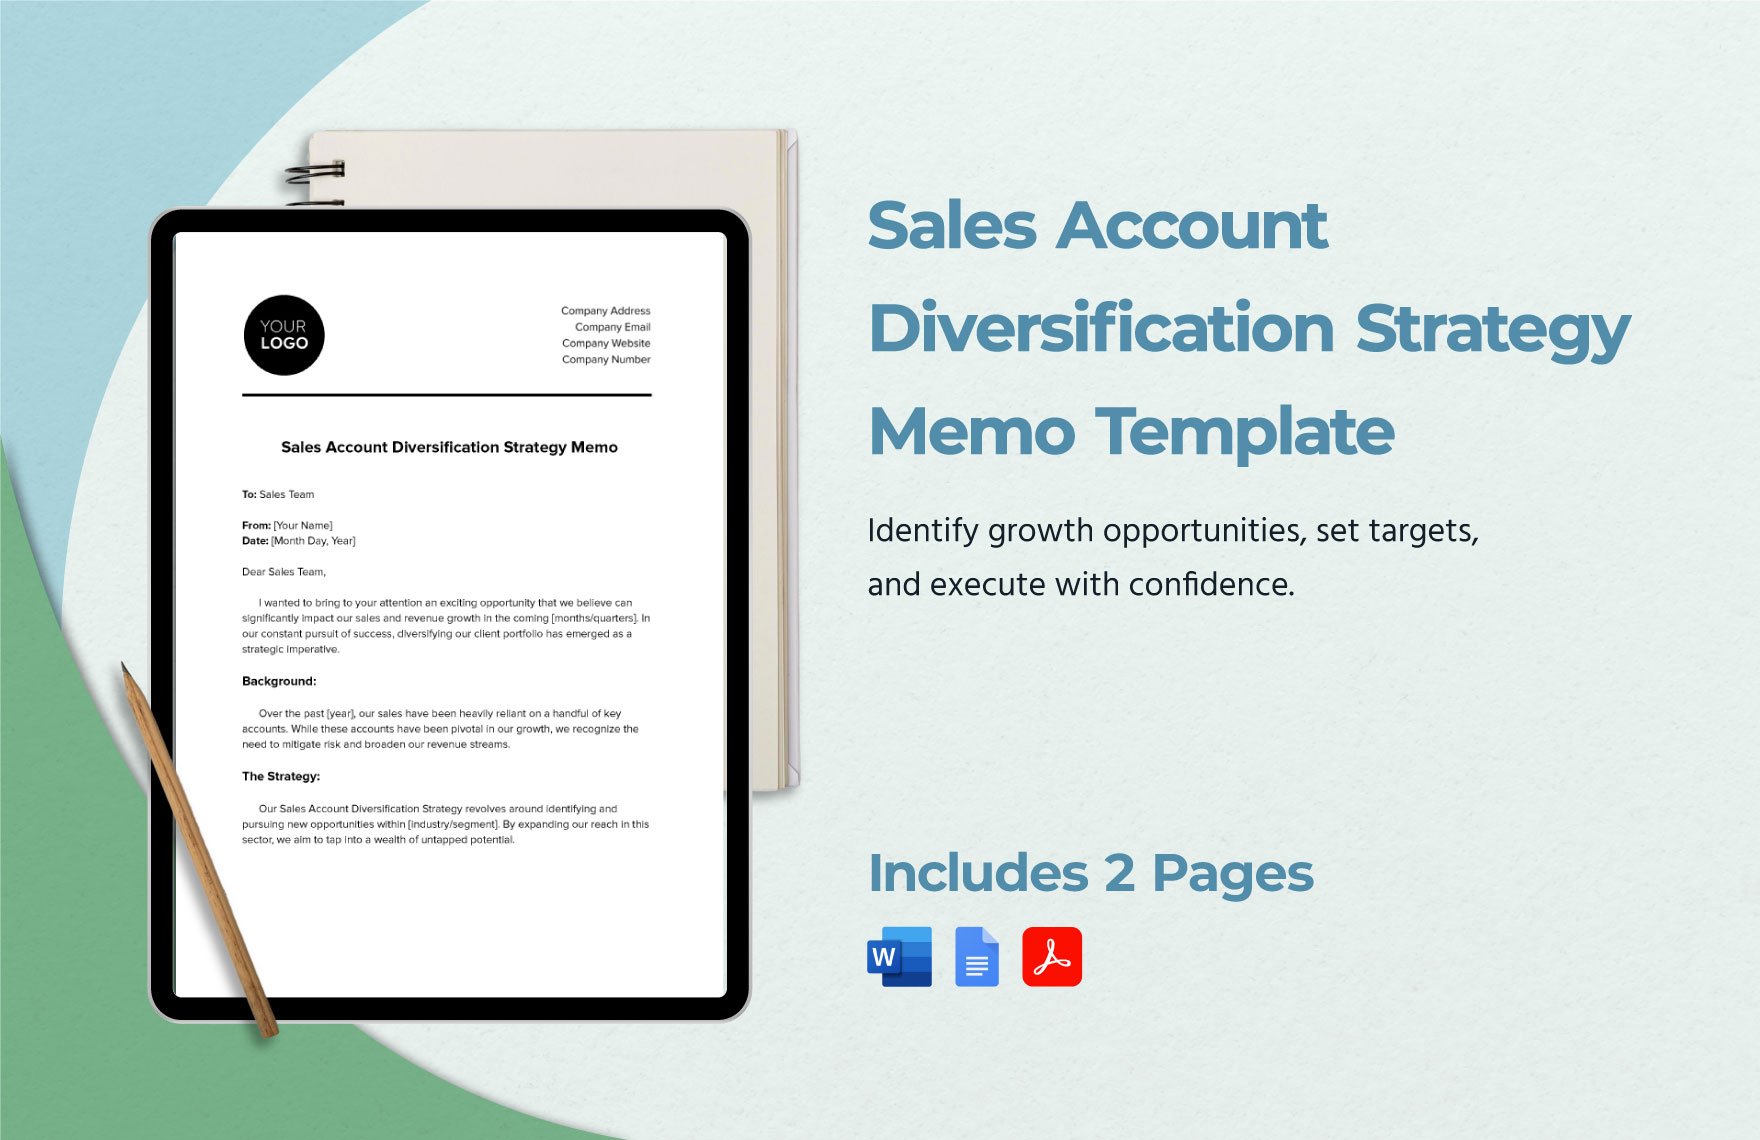 Sales Account Diversification Strategy Memo Template in Word, Google Docs, PDF